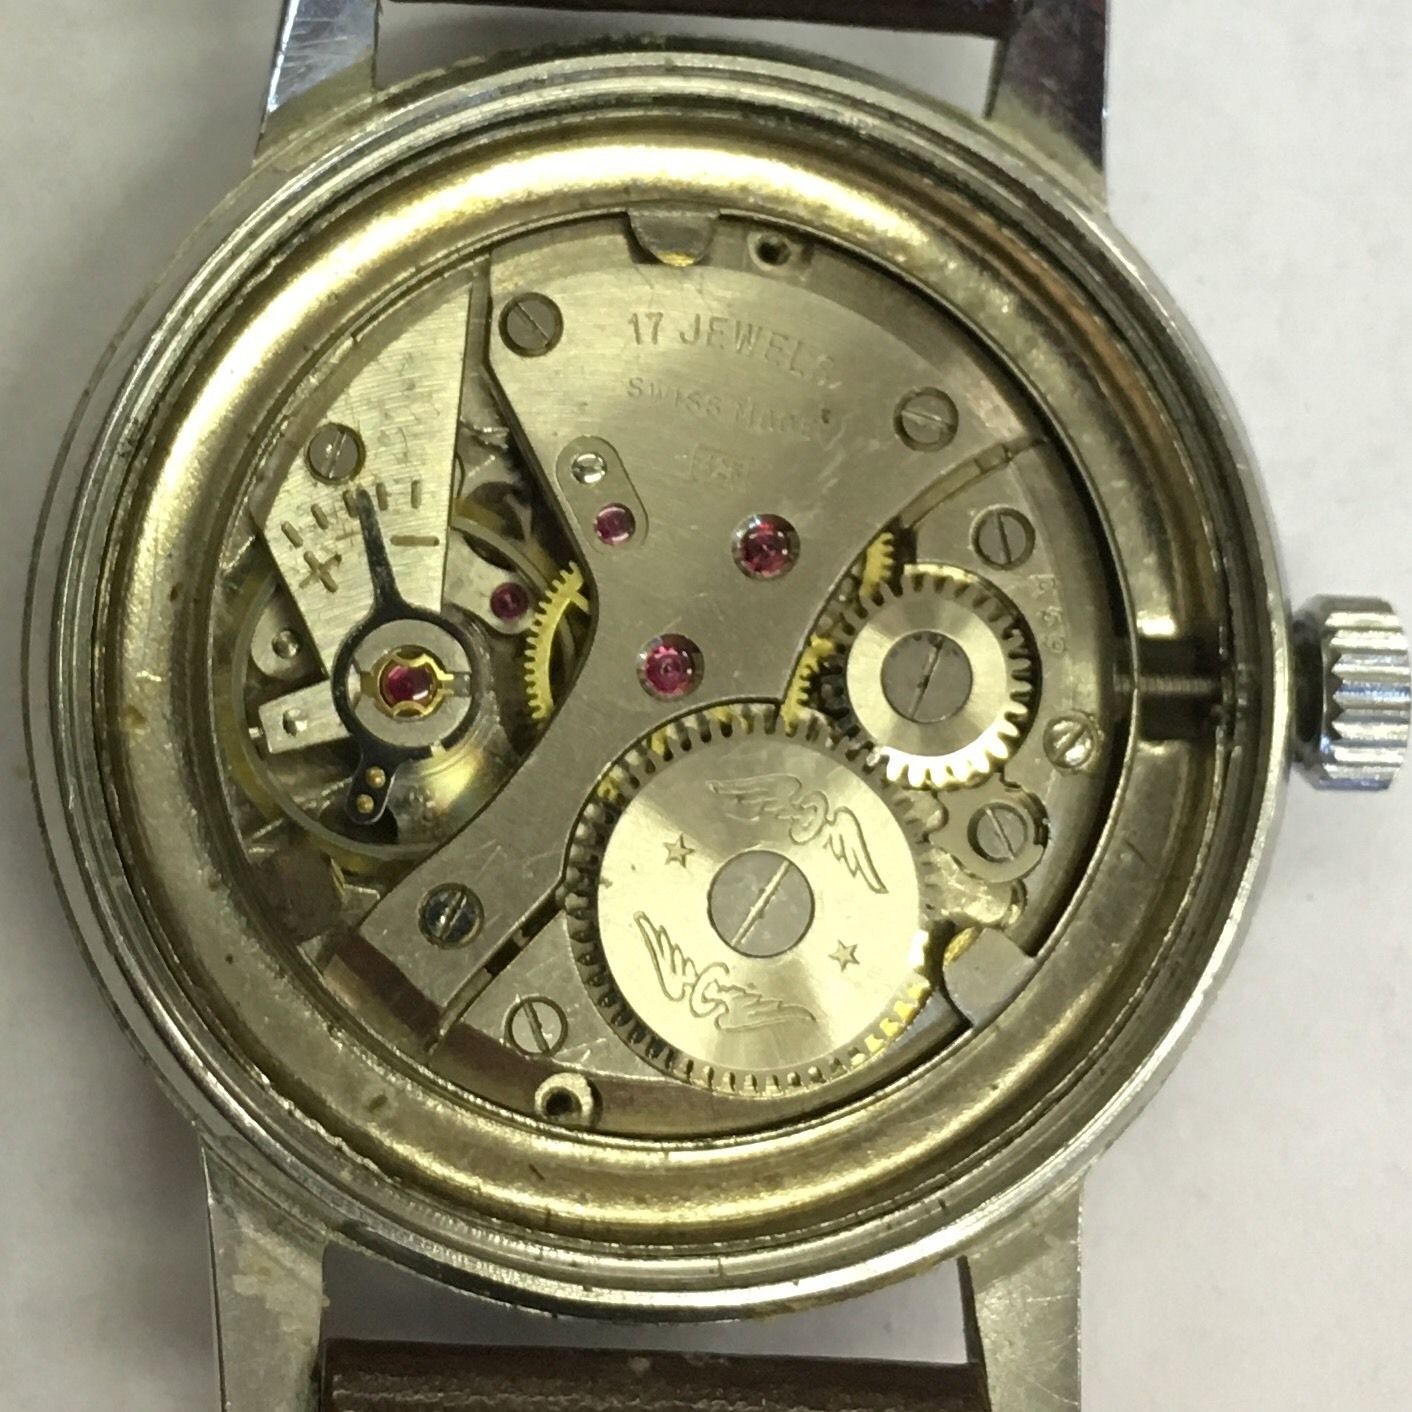 Vintage Rotary 17 Jewels Incabloc Swiss Made Manual Stainless Steel ...